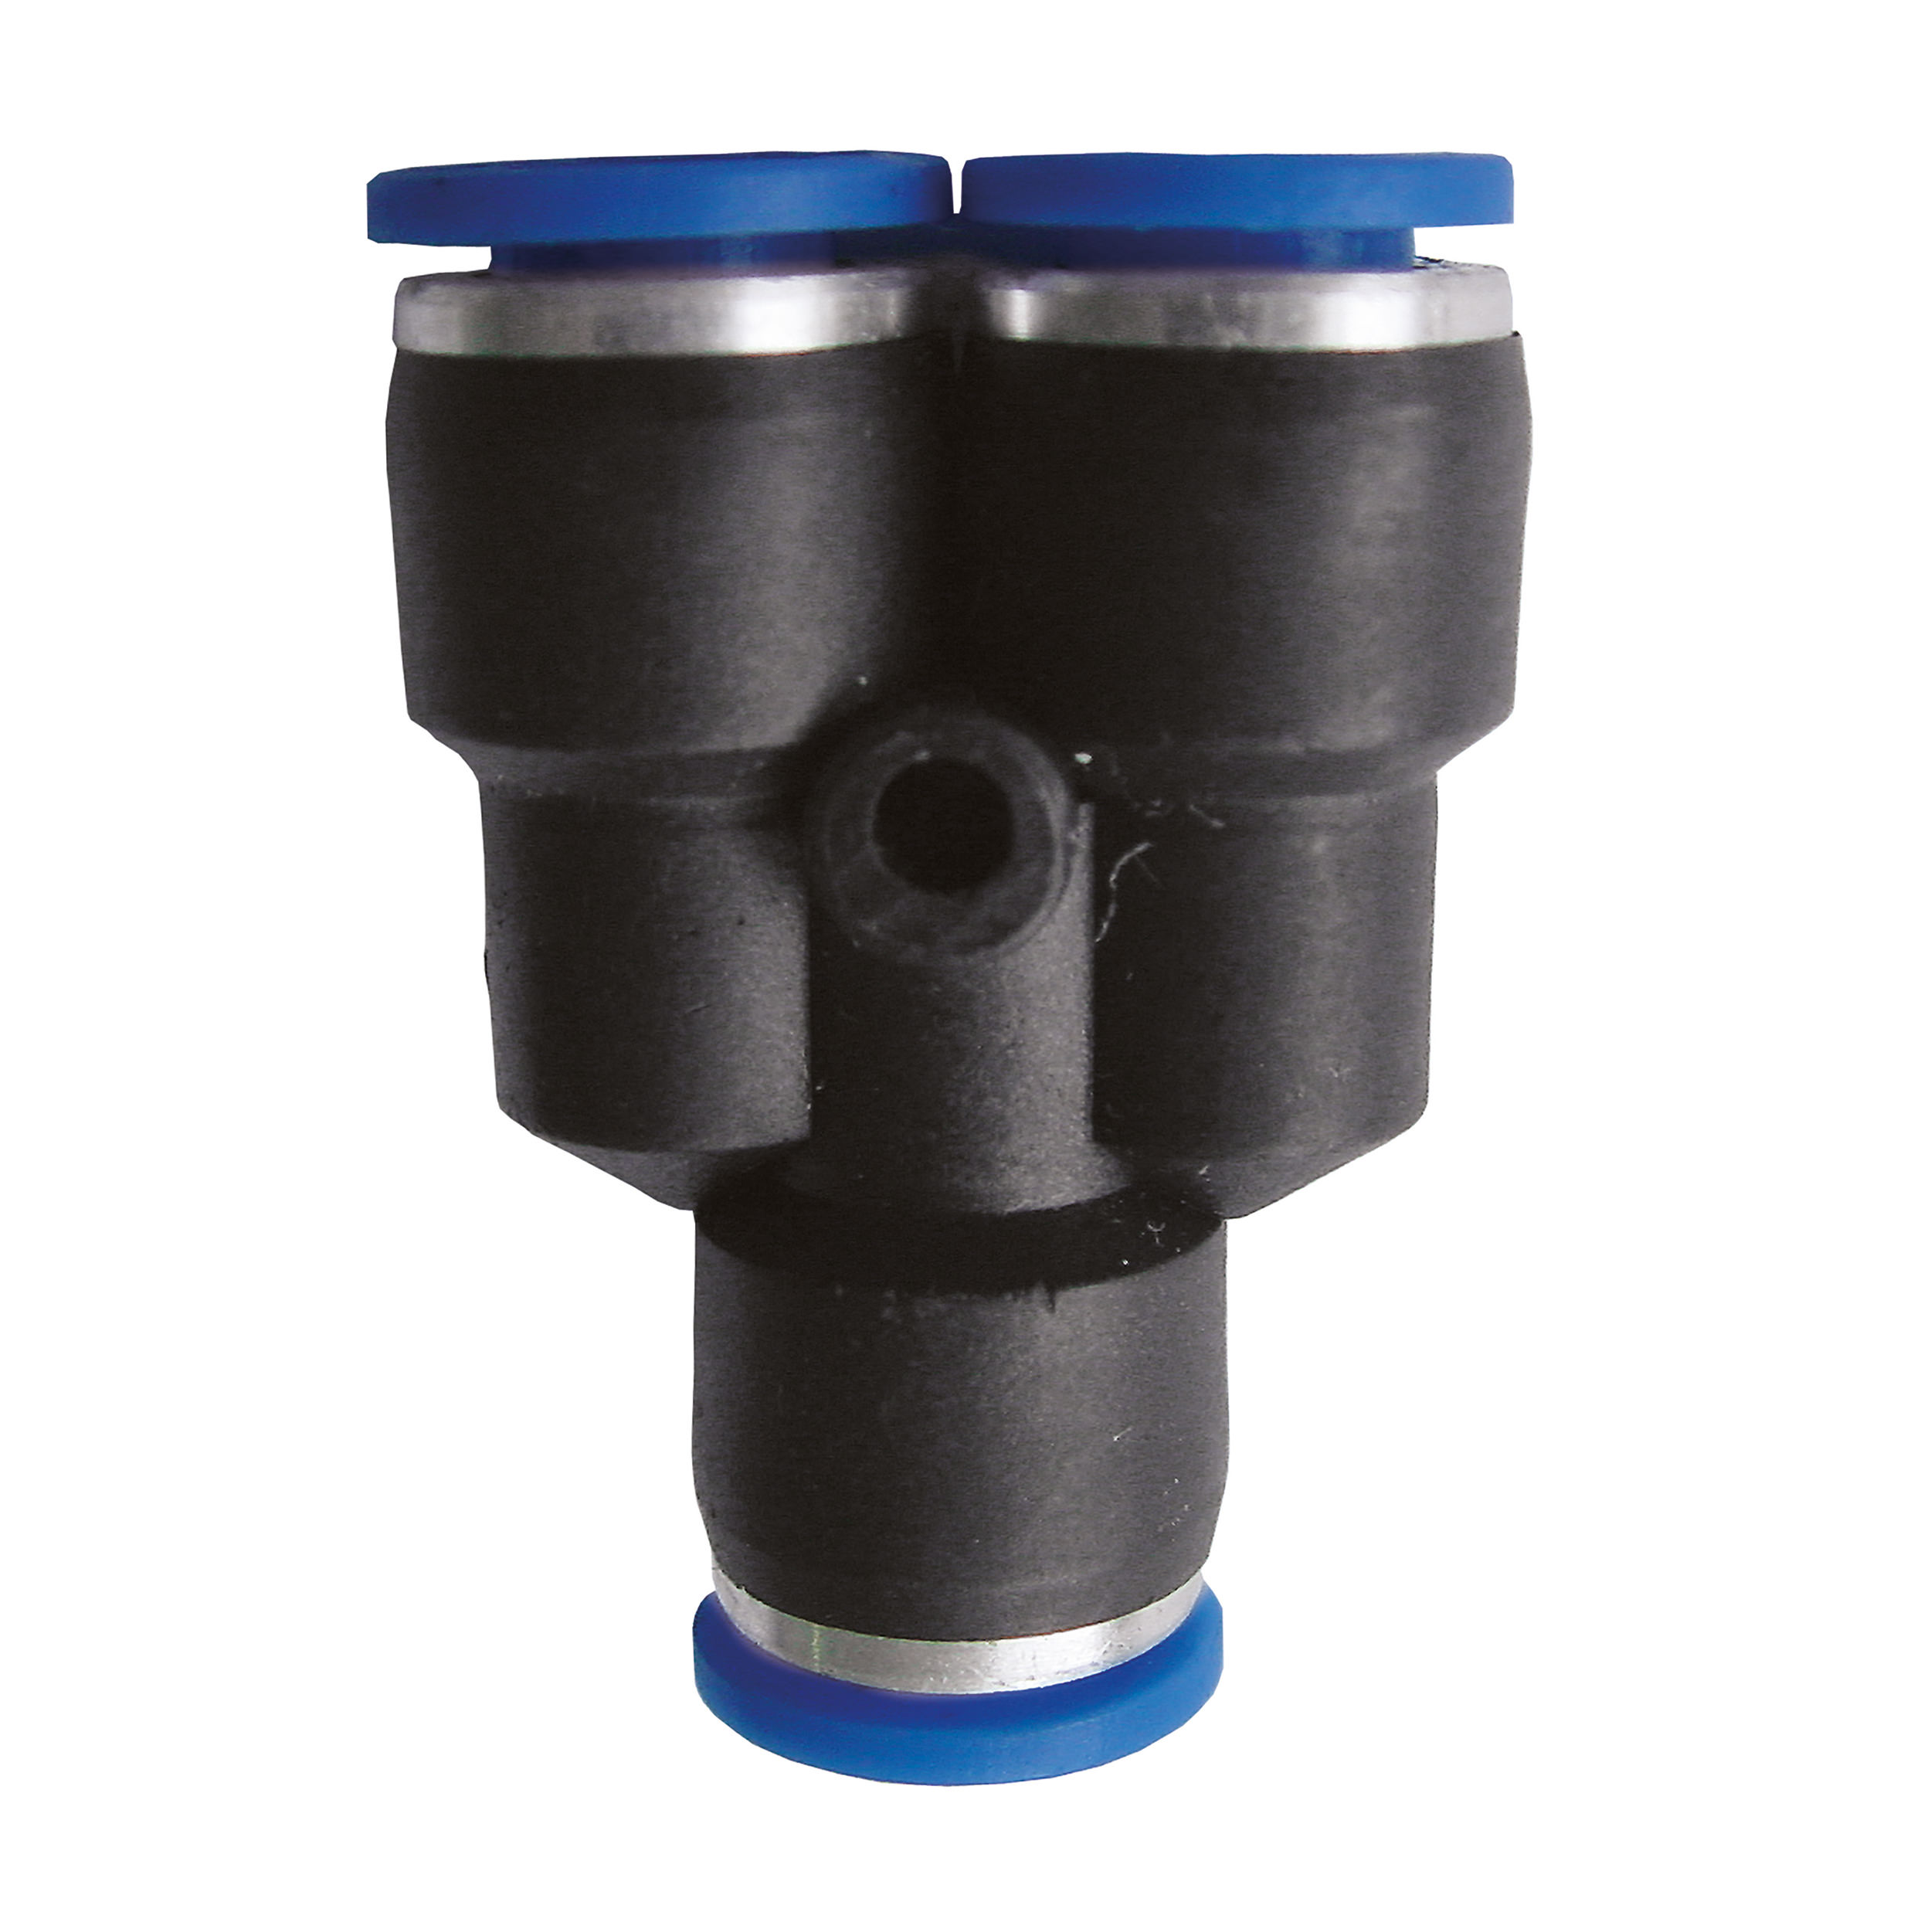 Push-in Y-connector, hose-Ø: D1: 1 × 12 mm, D2: 2 × 10 mm; B(L): 53 mm, Ød: 4 mm, max. operating pressure: 145 psi, reduced